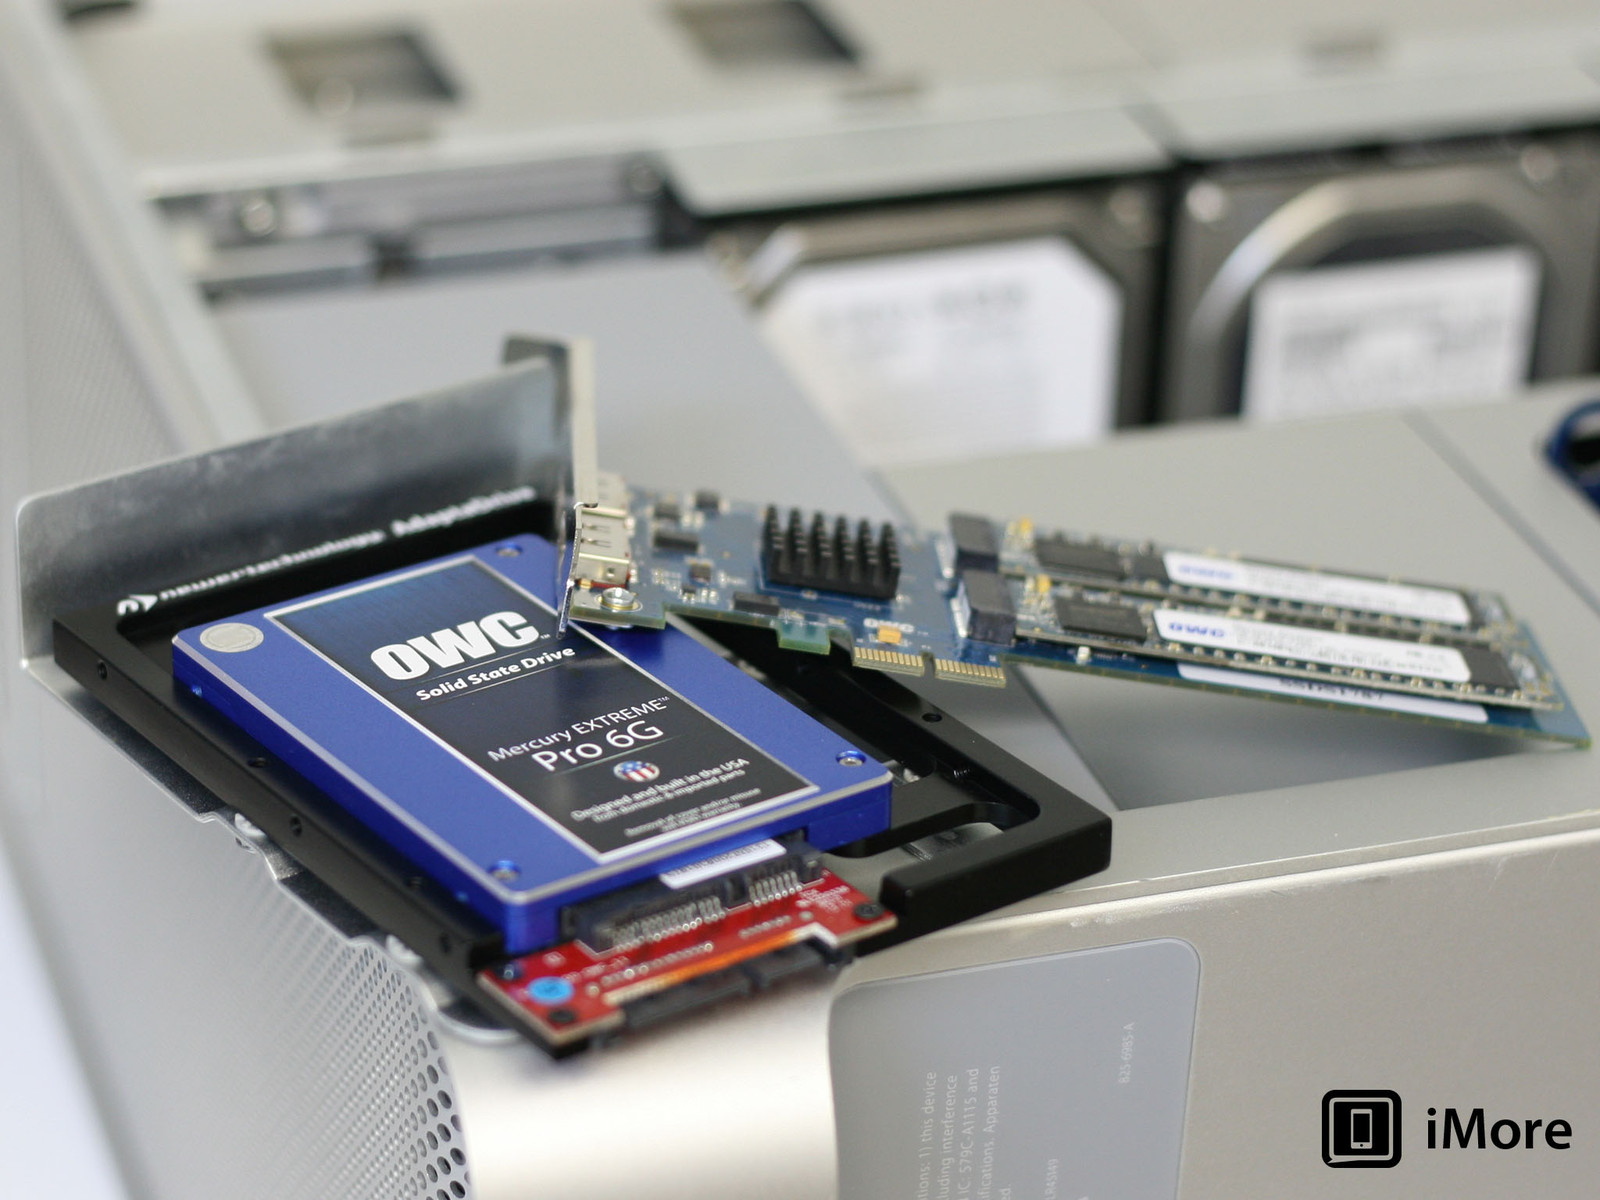 Samsung evo ssd mounting kit for macbook pro